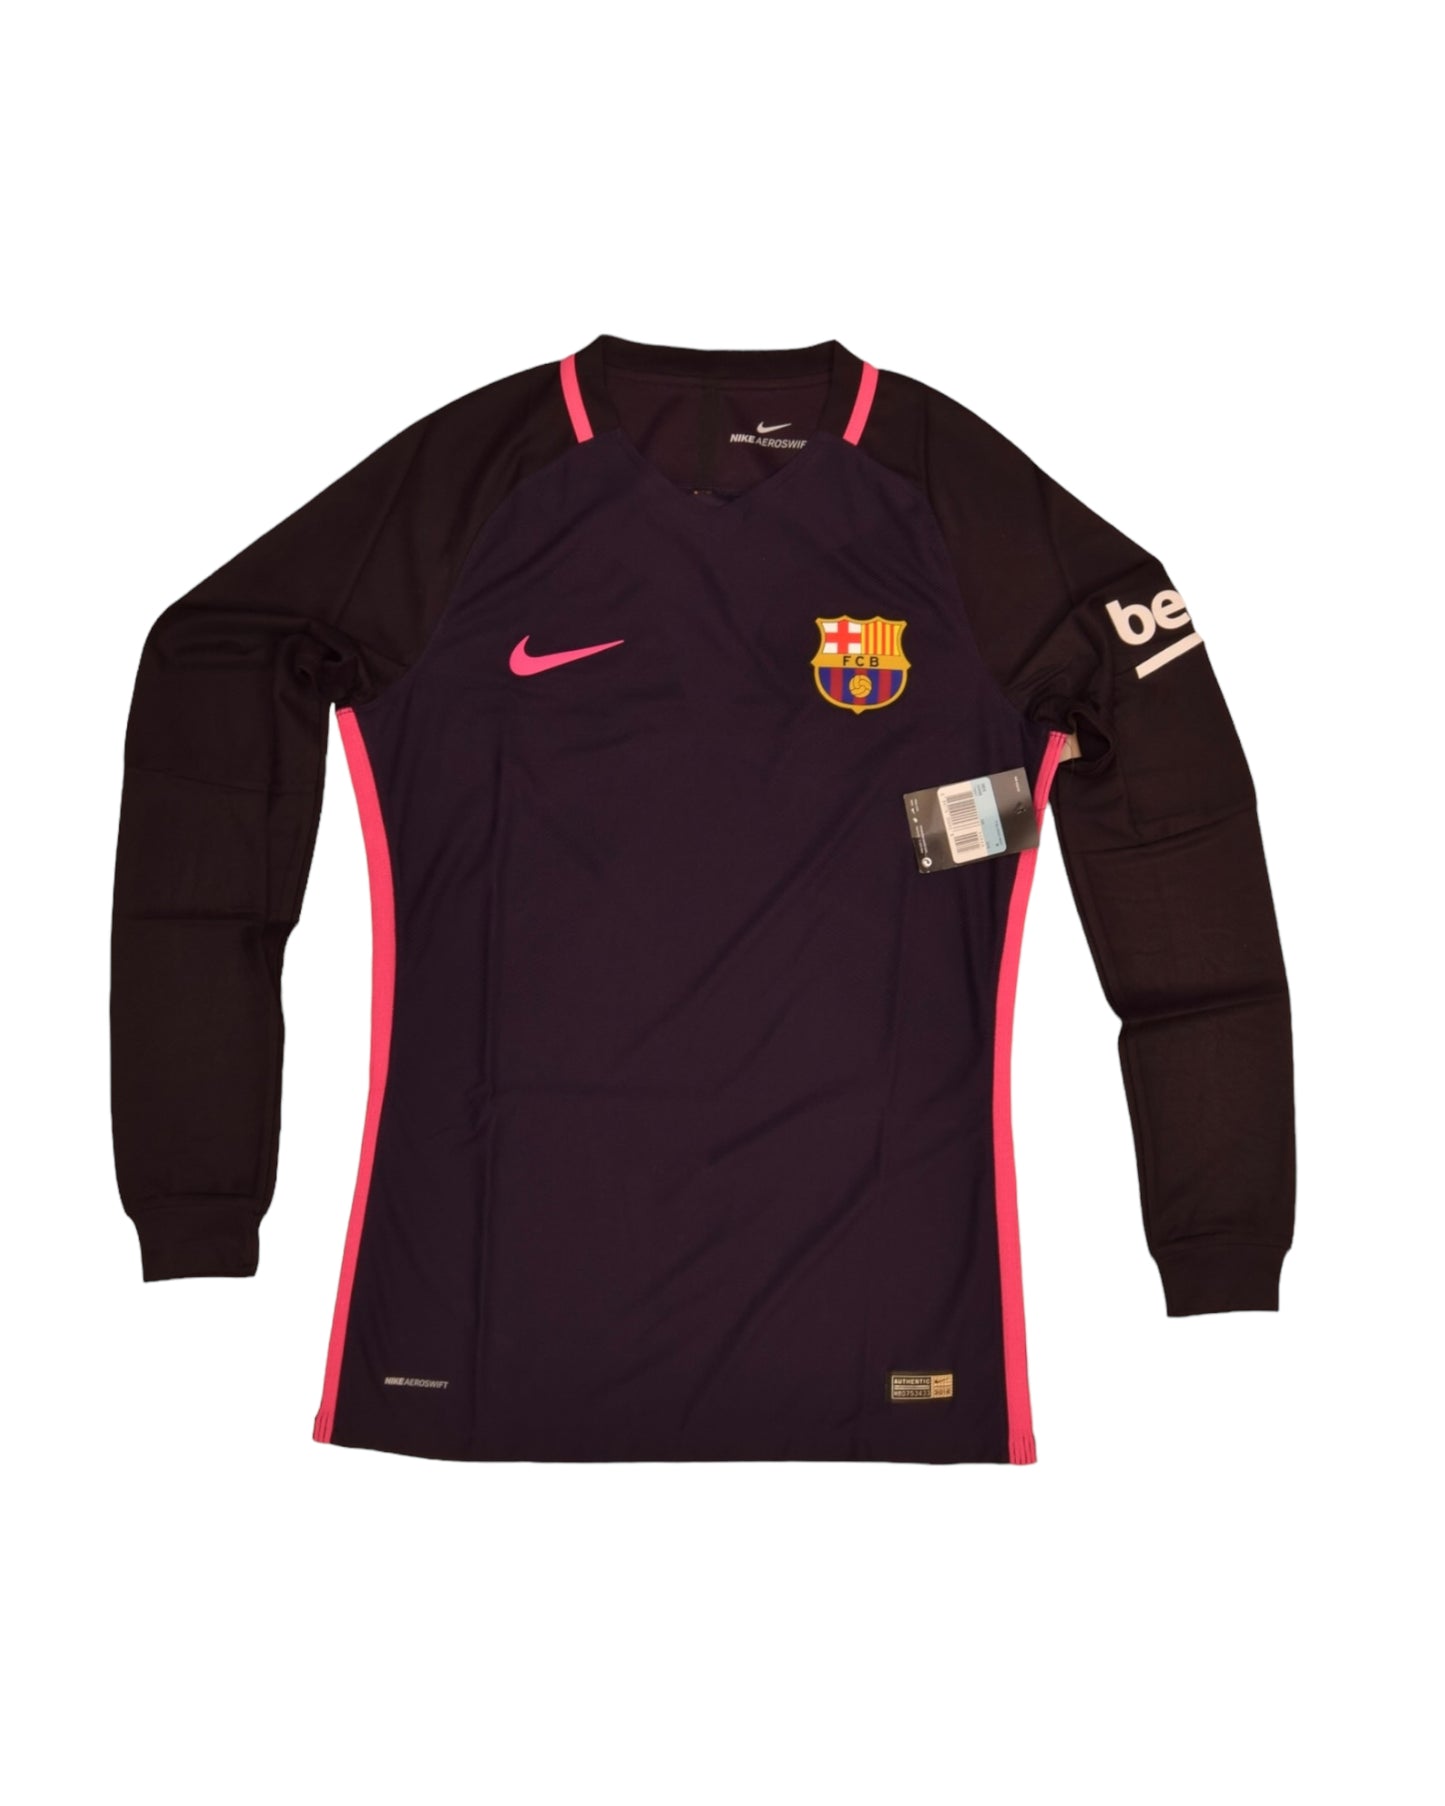 Authentic New FC Barcelona Nike Aeroswift 2016 - 2017 Player's Issue / Edition Away Football Deadstock BNWT Long Sleeve Shirt Size M Unicef